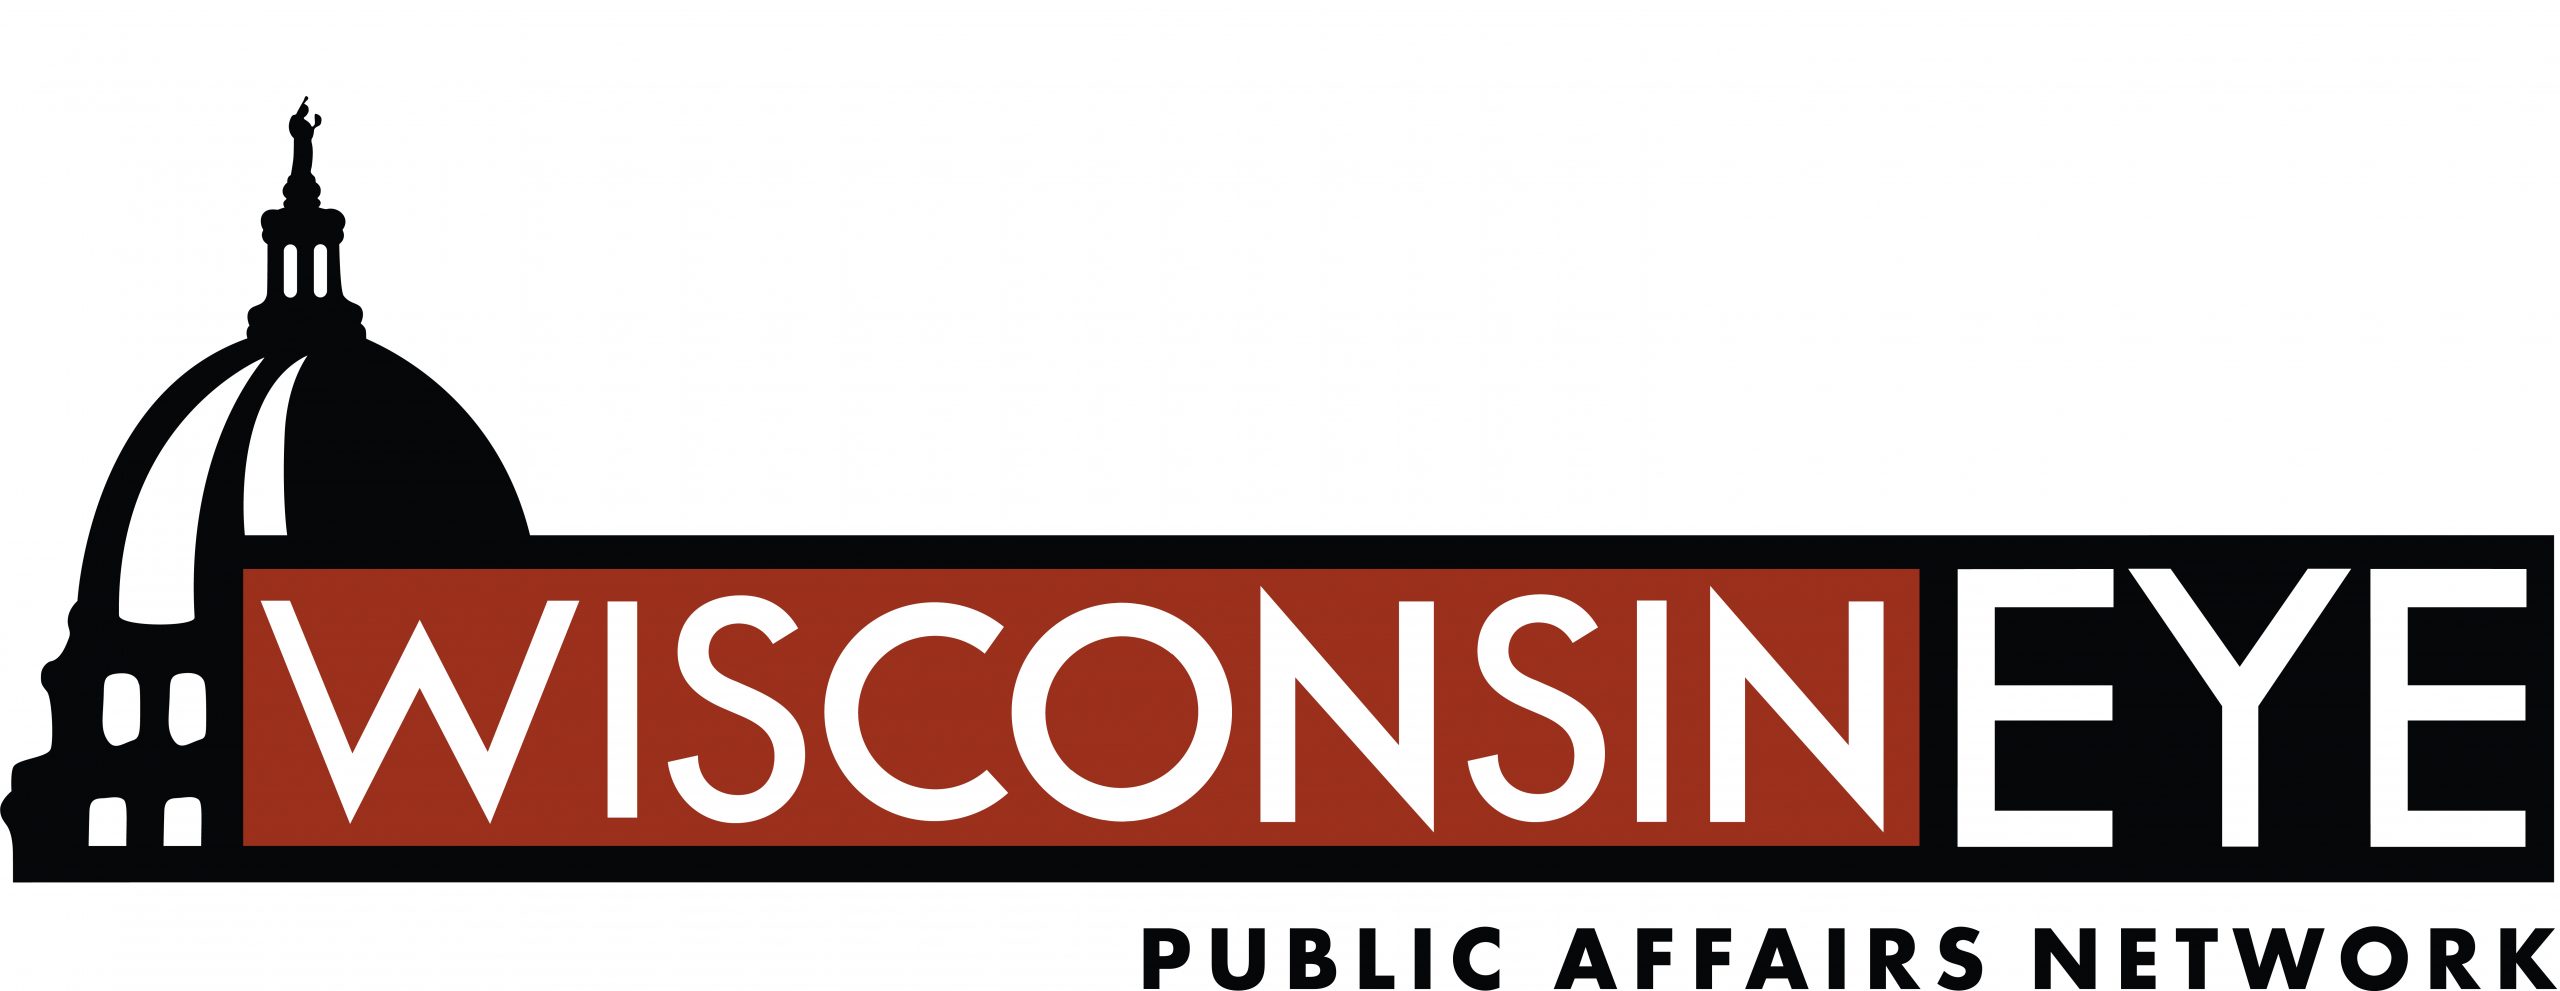 WisconsinEye Public Affairs Network Calls for Refrain From Using Archived Video in Negative Campaign Advertising